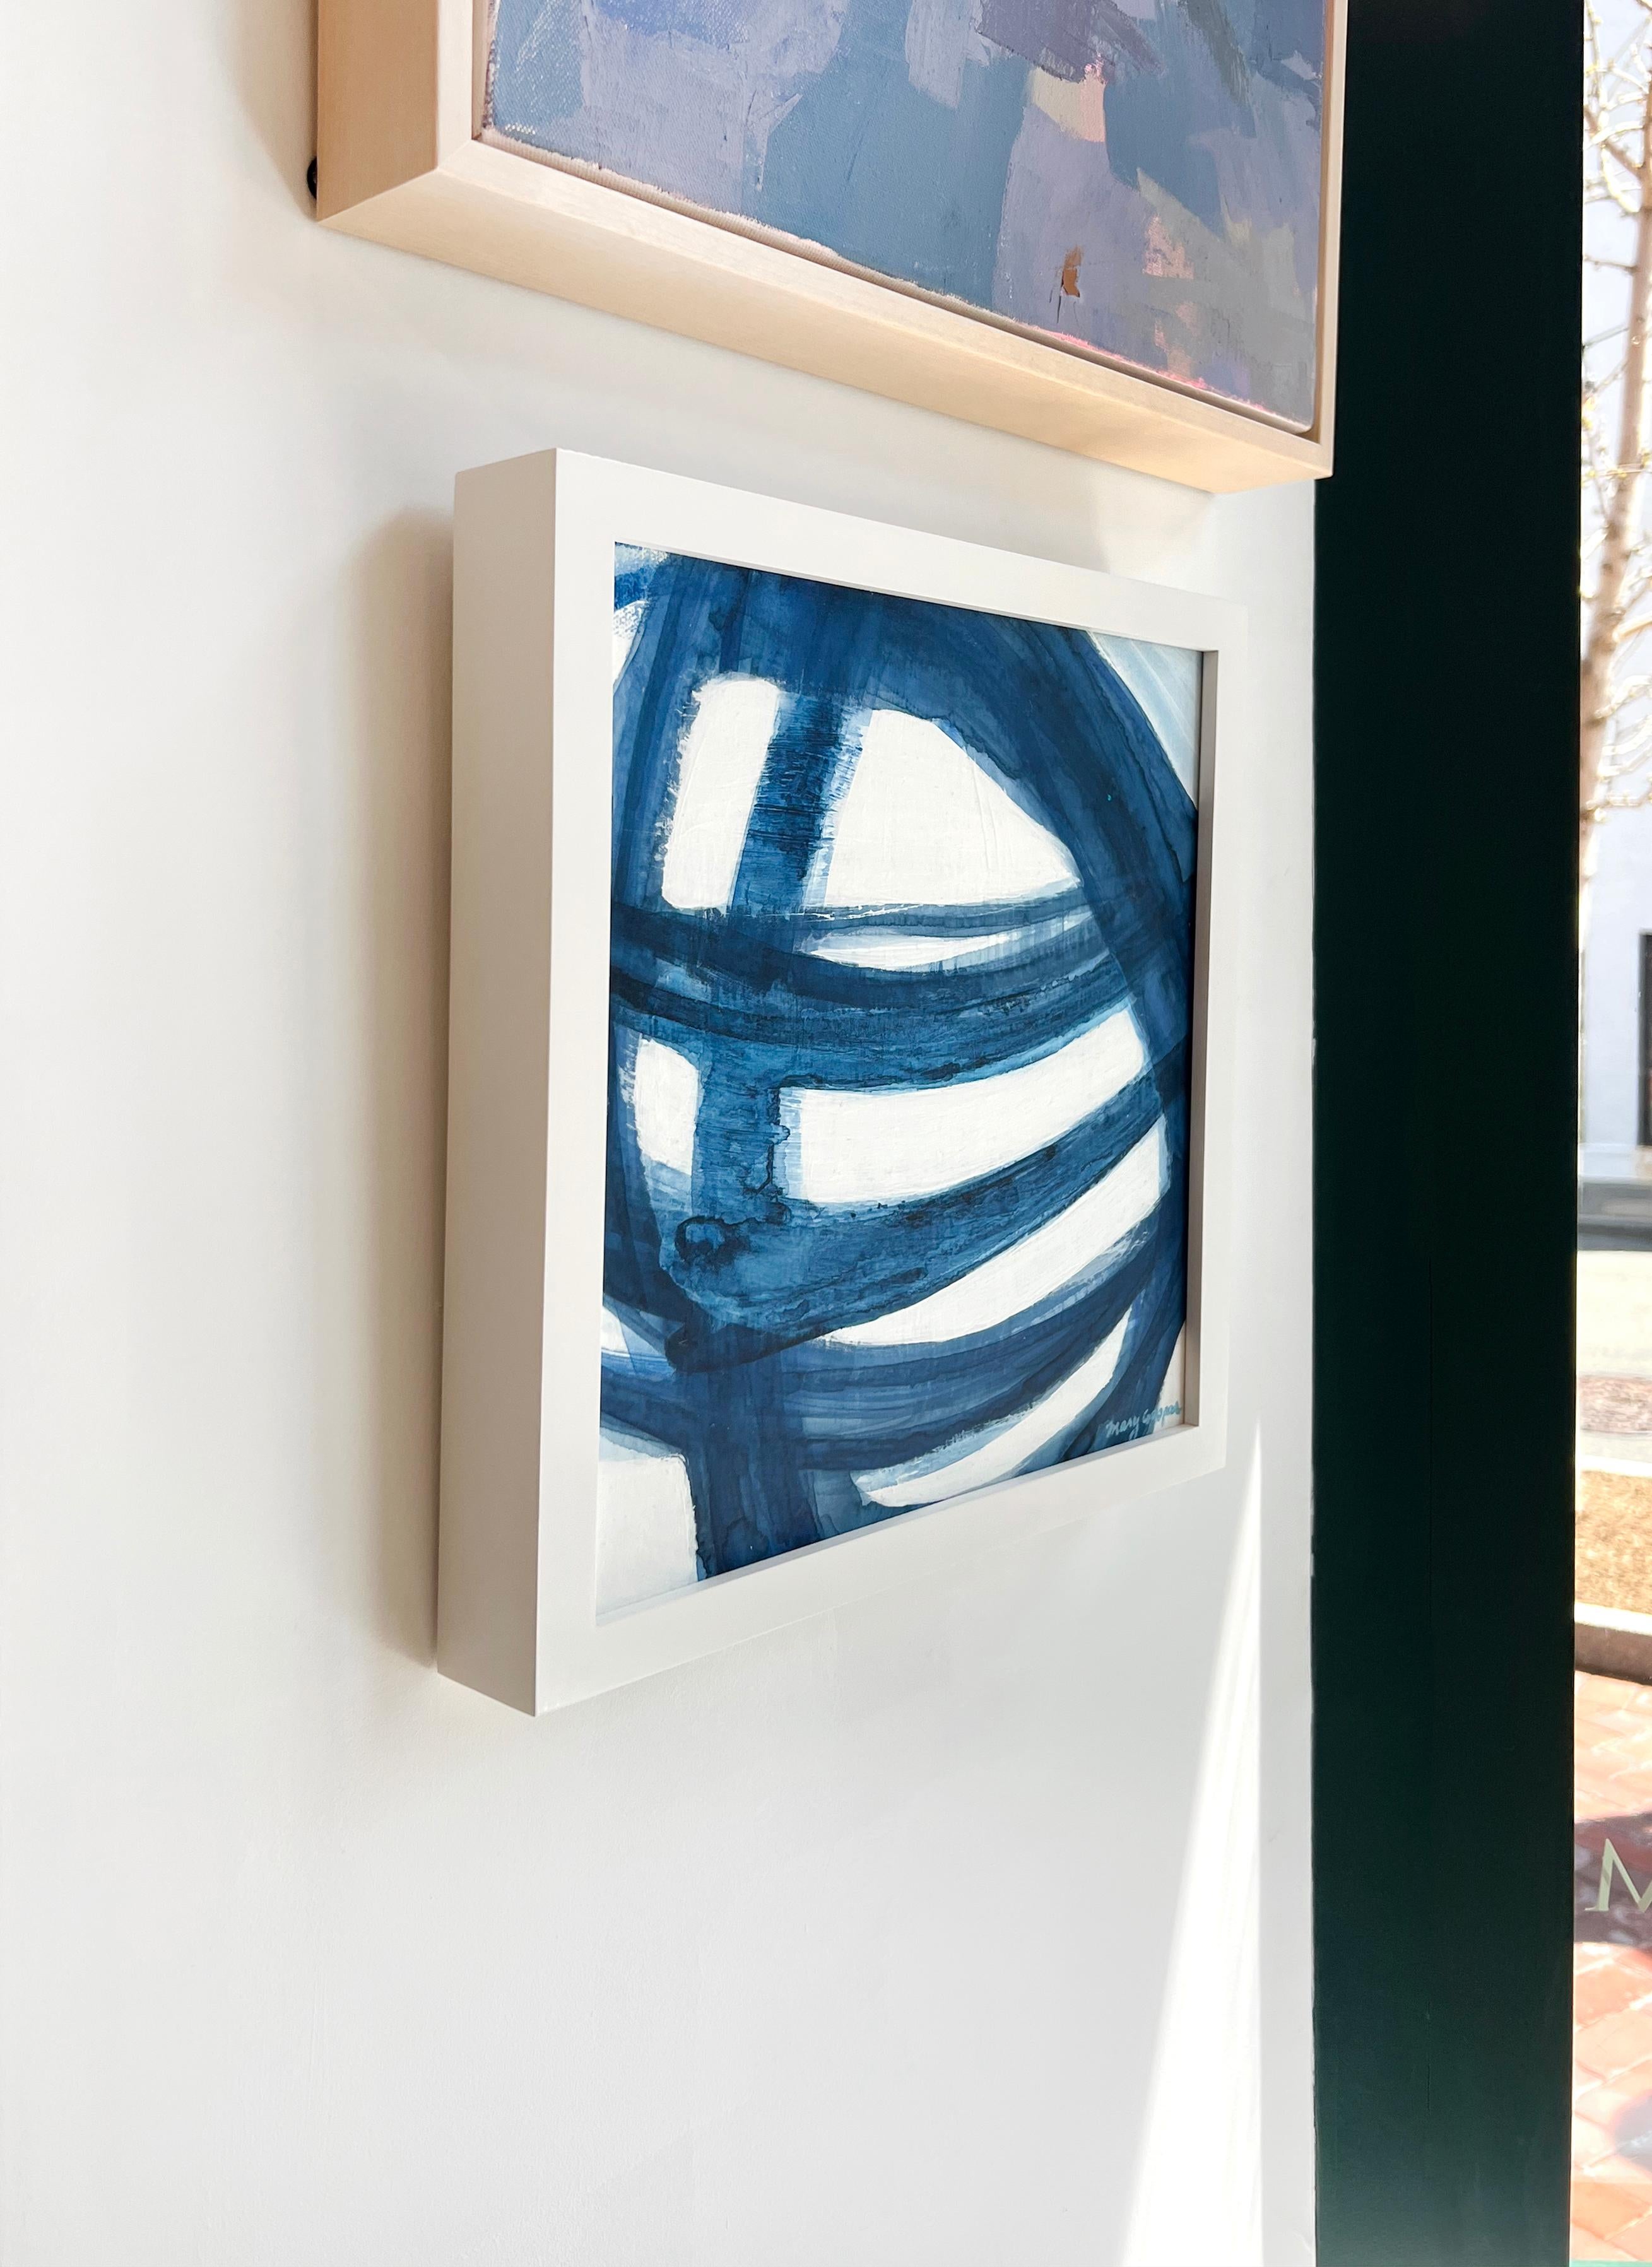 This abstract painting by Mary Gaspar features a cool blue and white palette. The artist organically moves a wash of blue acrylic and watercolor paint across the canvas in strokes to create what she calls, 